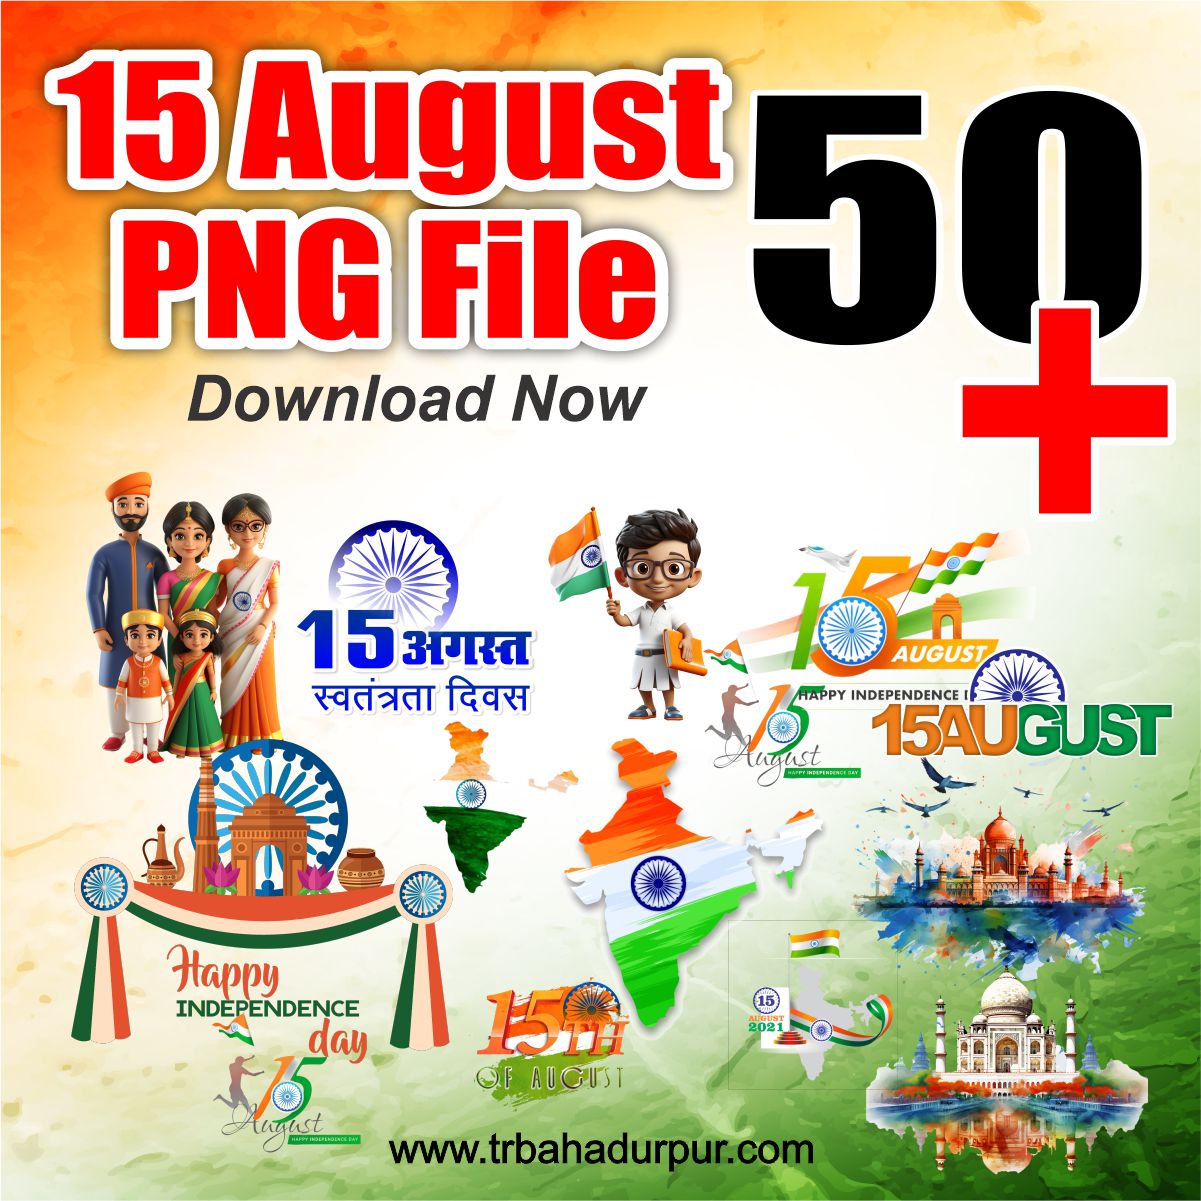 15 AUGUST PNG IMAGE